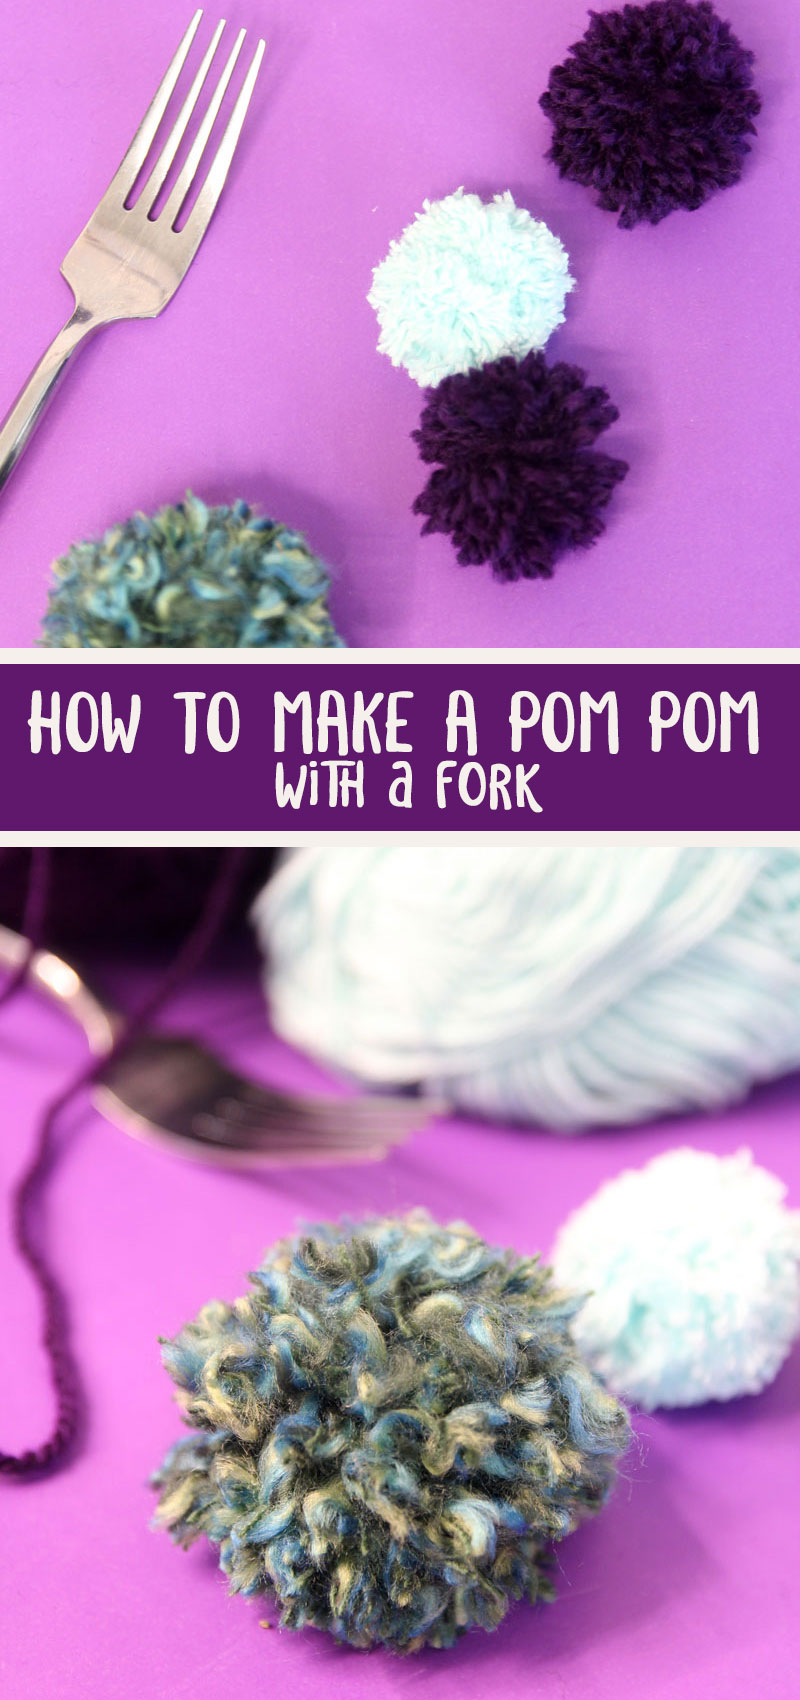 How to make a pom pom with a fork hero collage